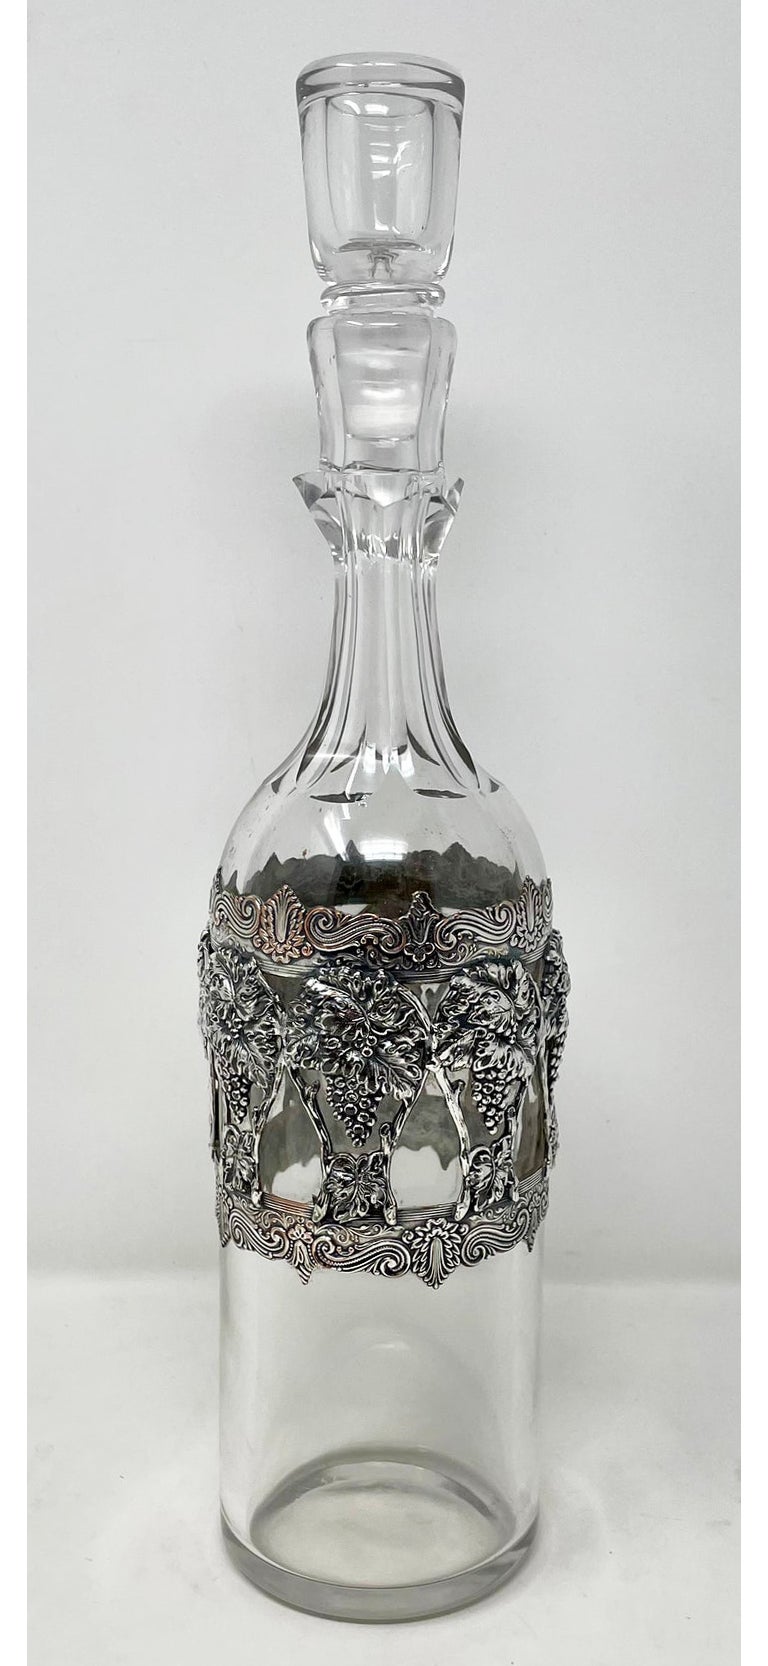 Antique American cut crystal wine decanter with sterling silver grape design overlay, Circa 1900. Per the final photograph, we currently have 2 of these decanters, each listed and sold individually. The decanter shown here is on the left in the last